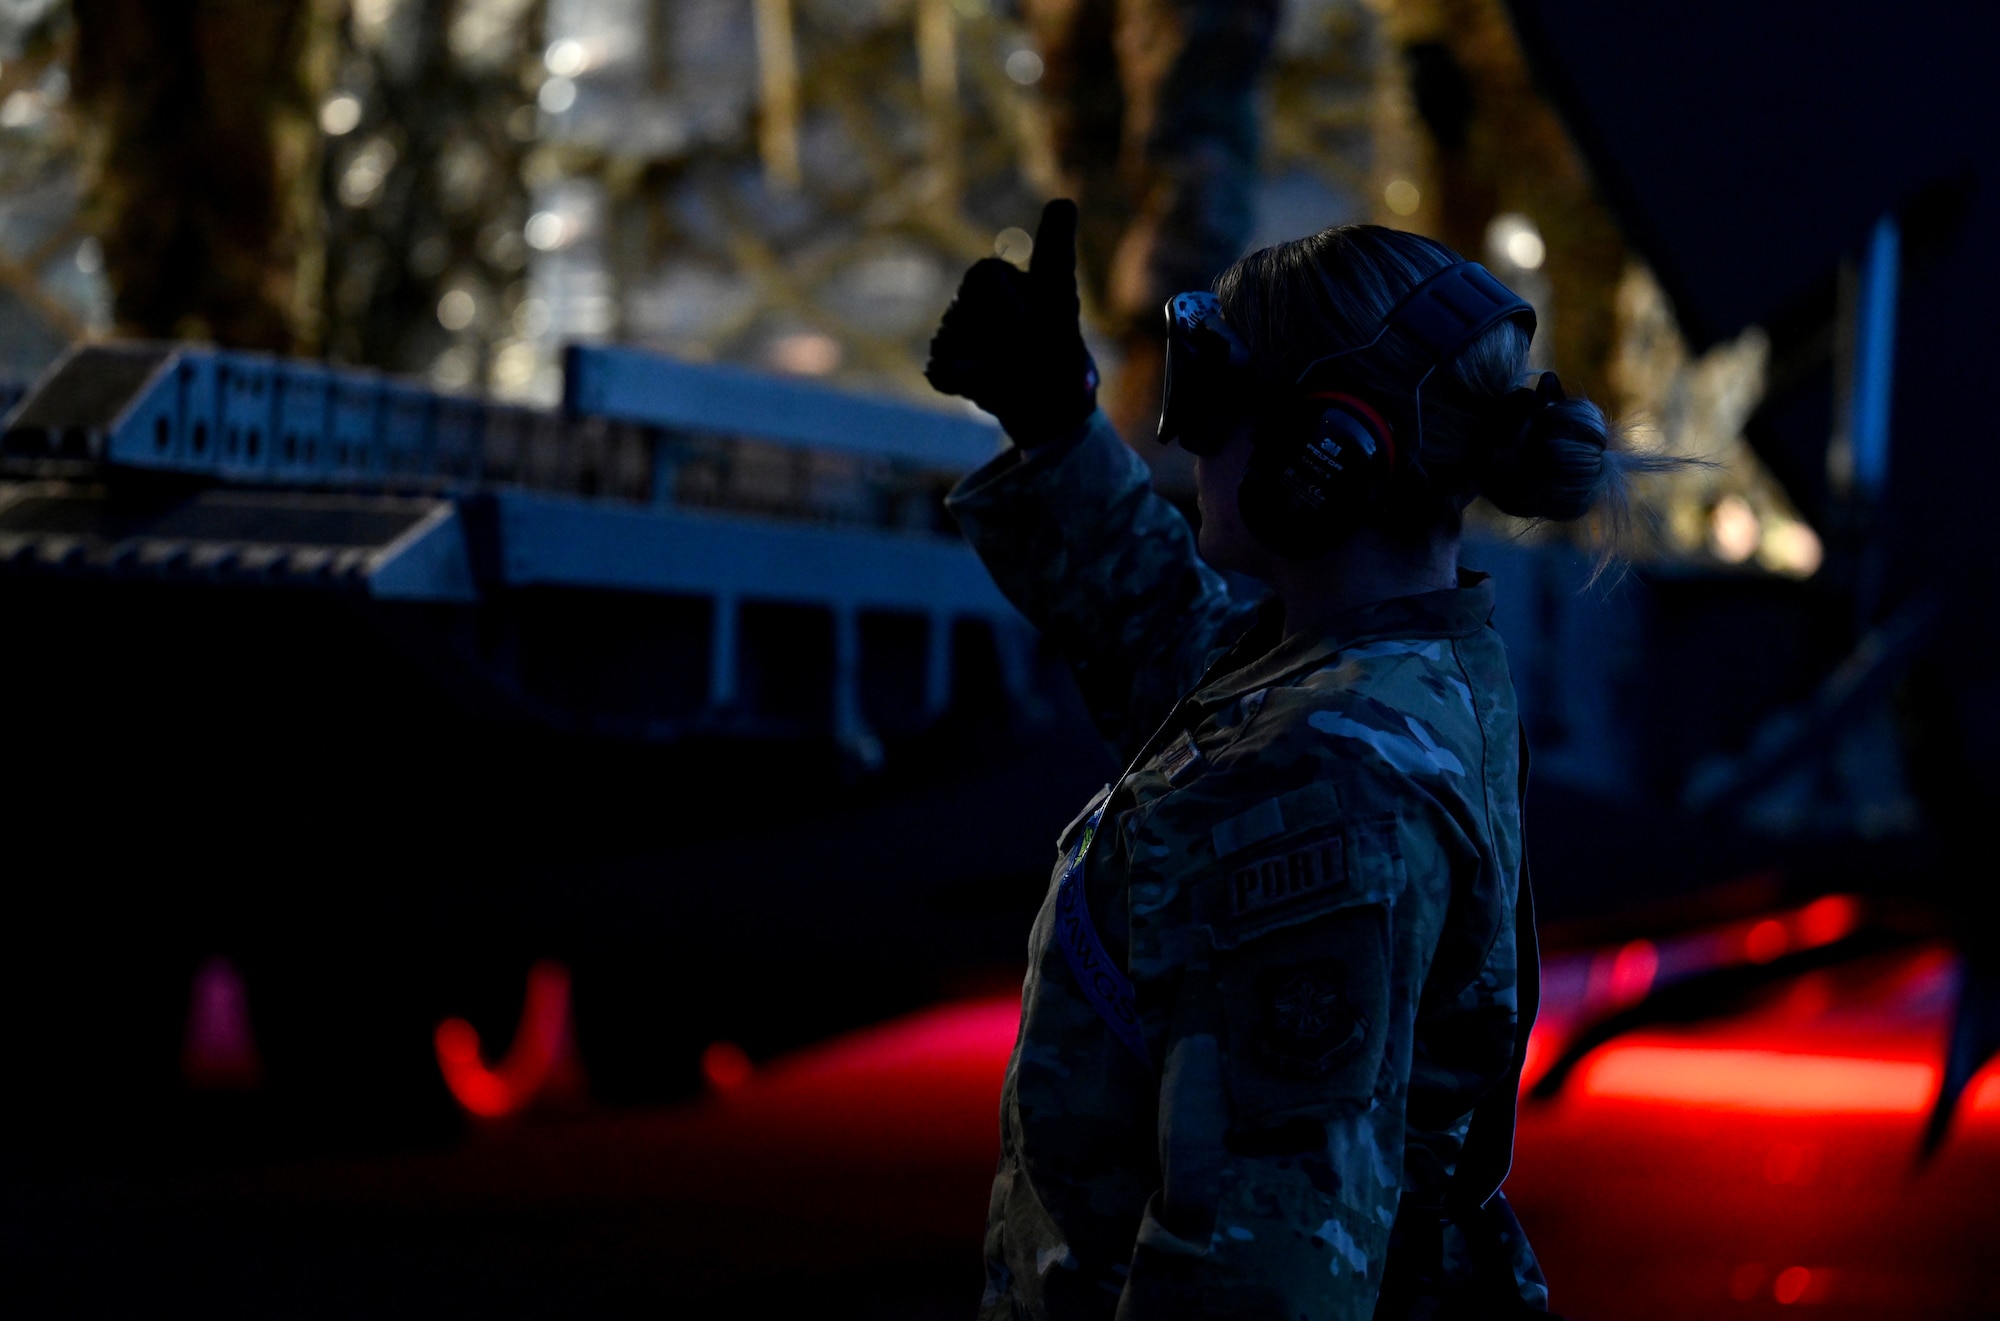 U.S. Air Force Senior Airman Courtney Decker assigned to the 721st Aerial Port Squadron, assists with guiding an aircraft cargo loader during Exercise Defender Europe 23 at Larissa Air Base, Greece, May 13, 2023.